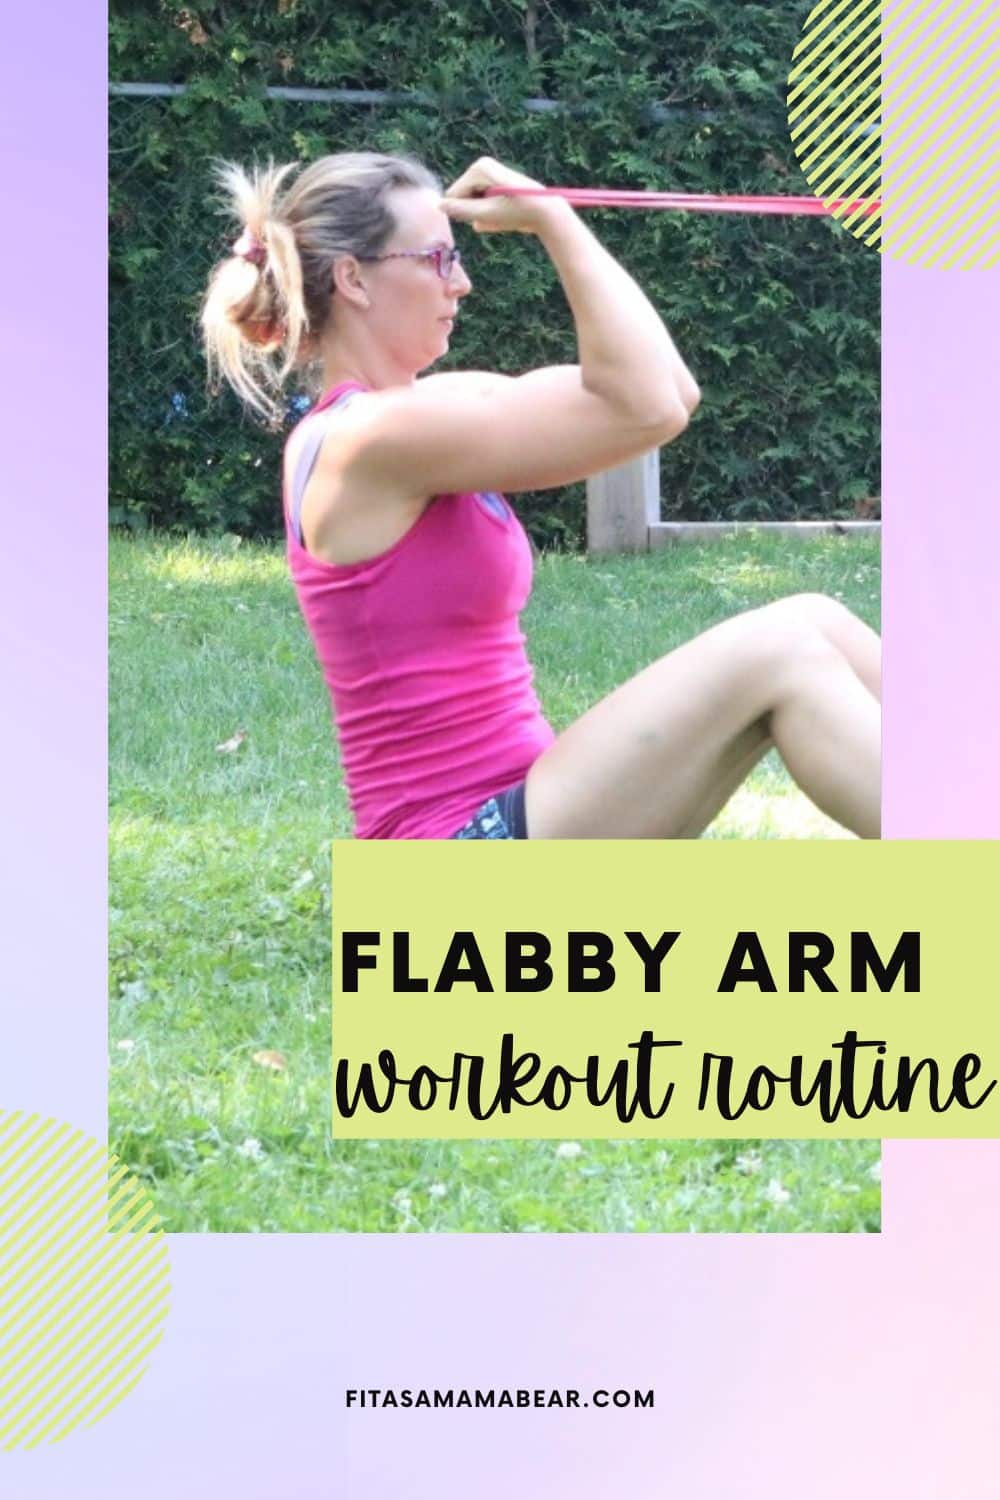 Pin image with text: woman in pink shirt and dark shorts doing a resistance band bicep curl with text about a workout for batwings